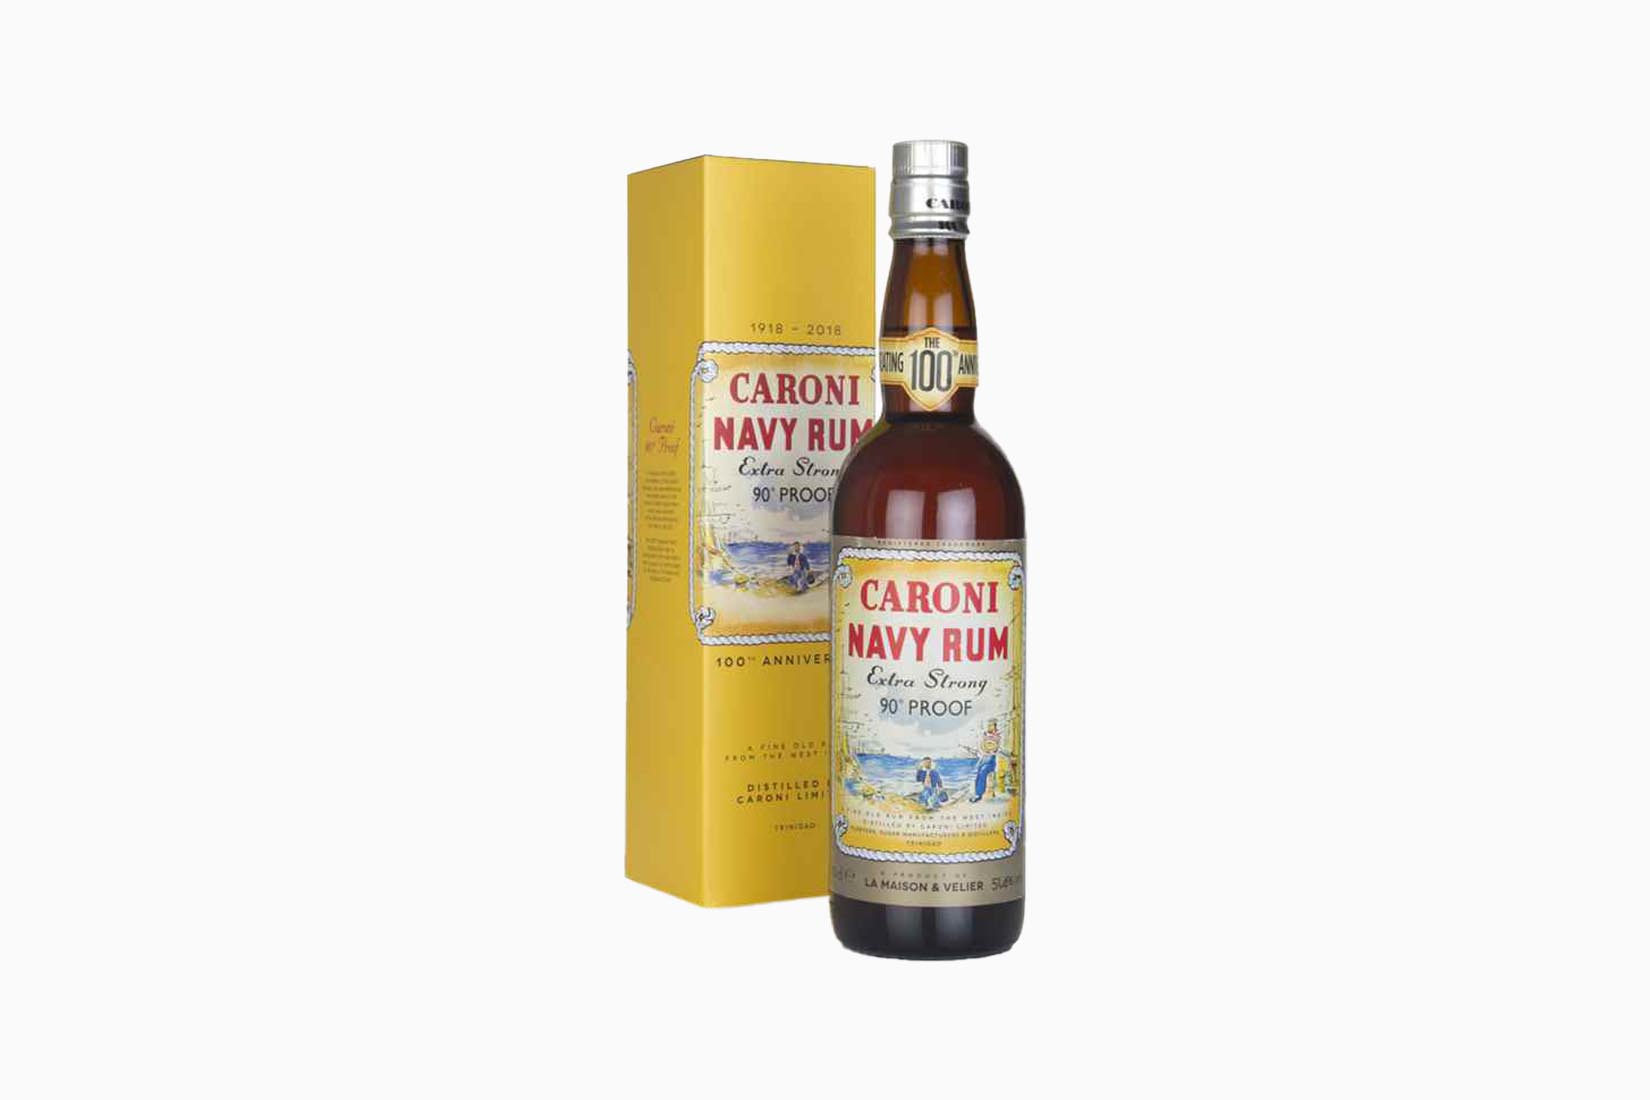 caroni navy rum extra strong review Luxe Digital